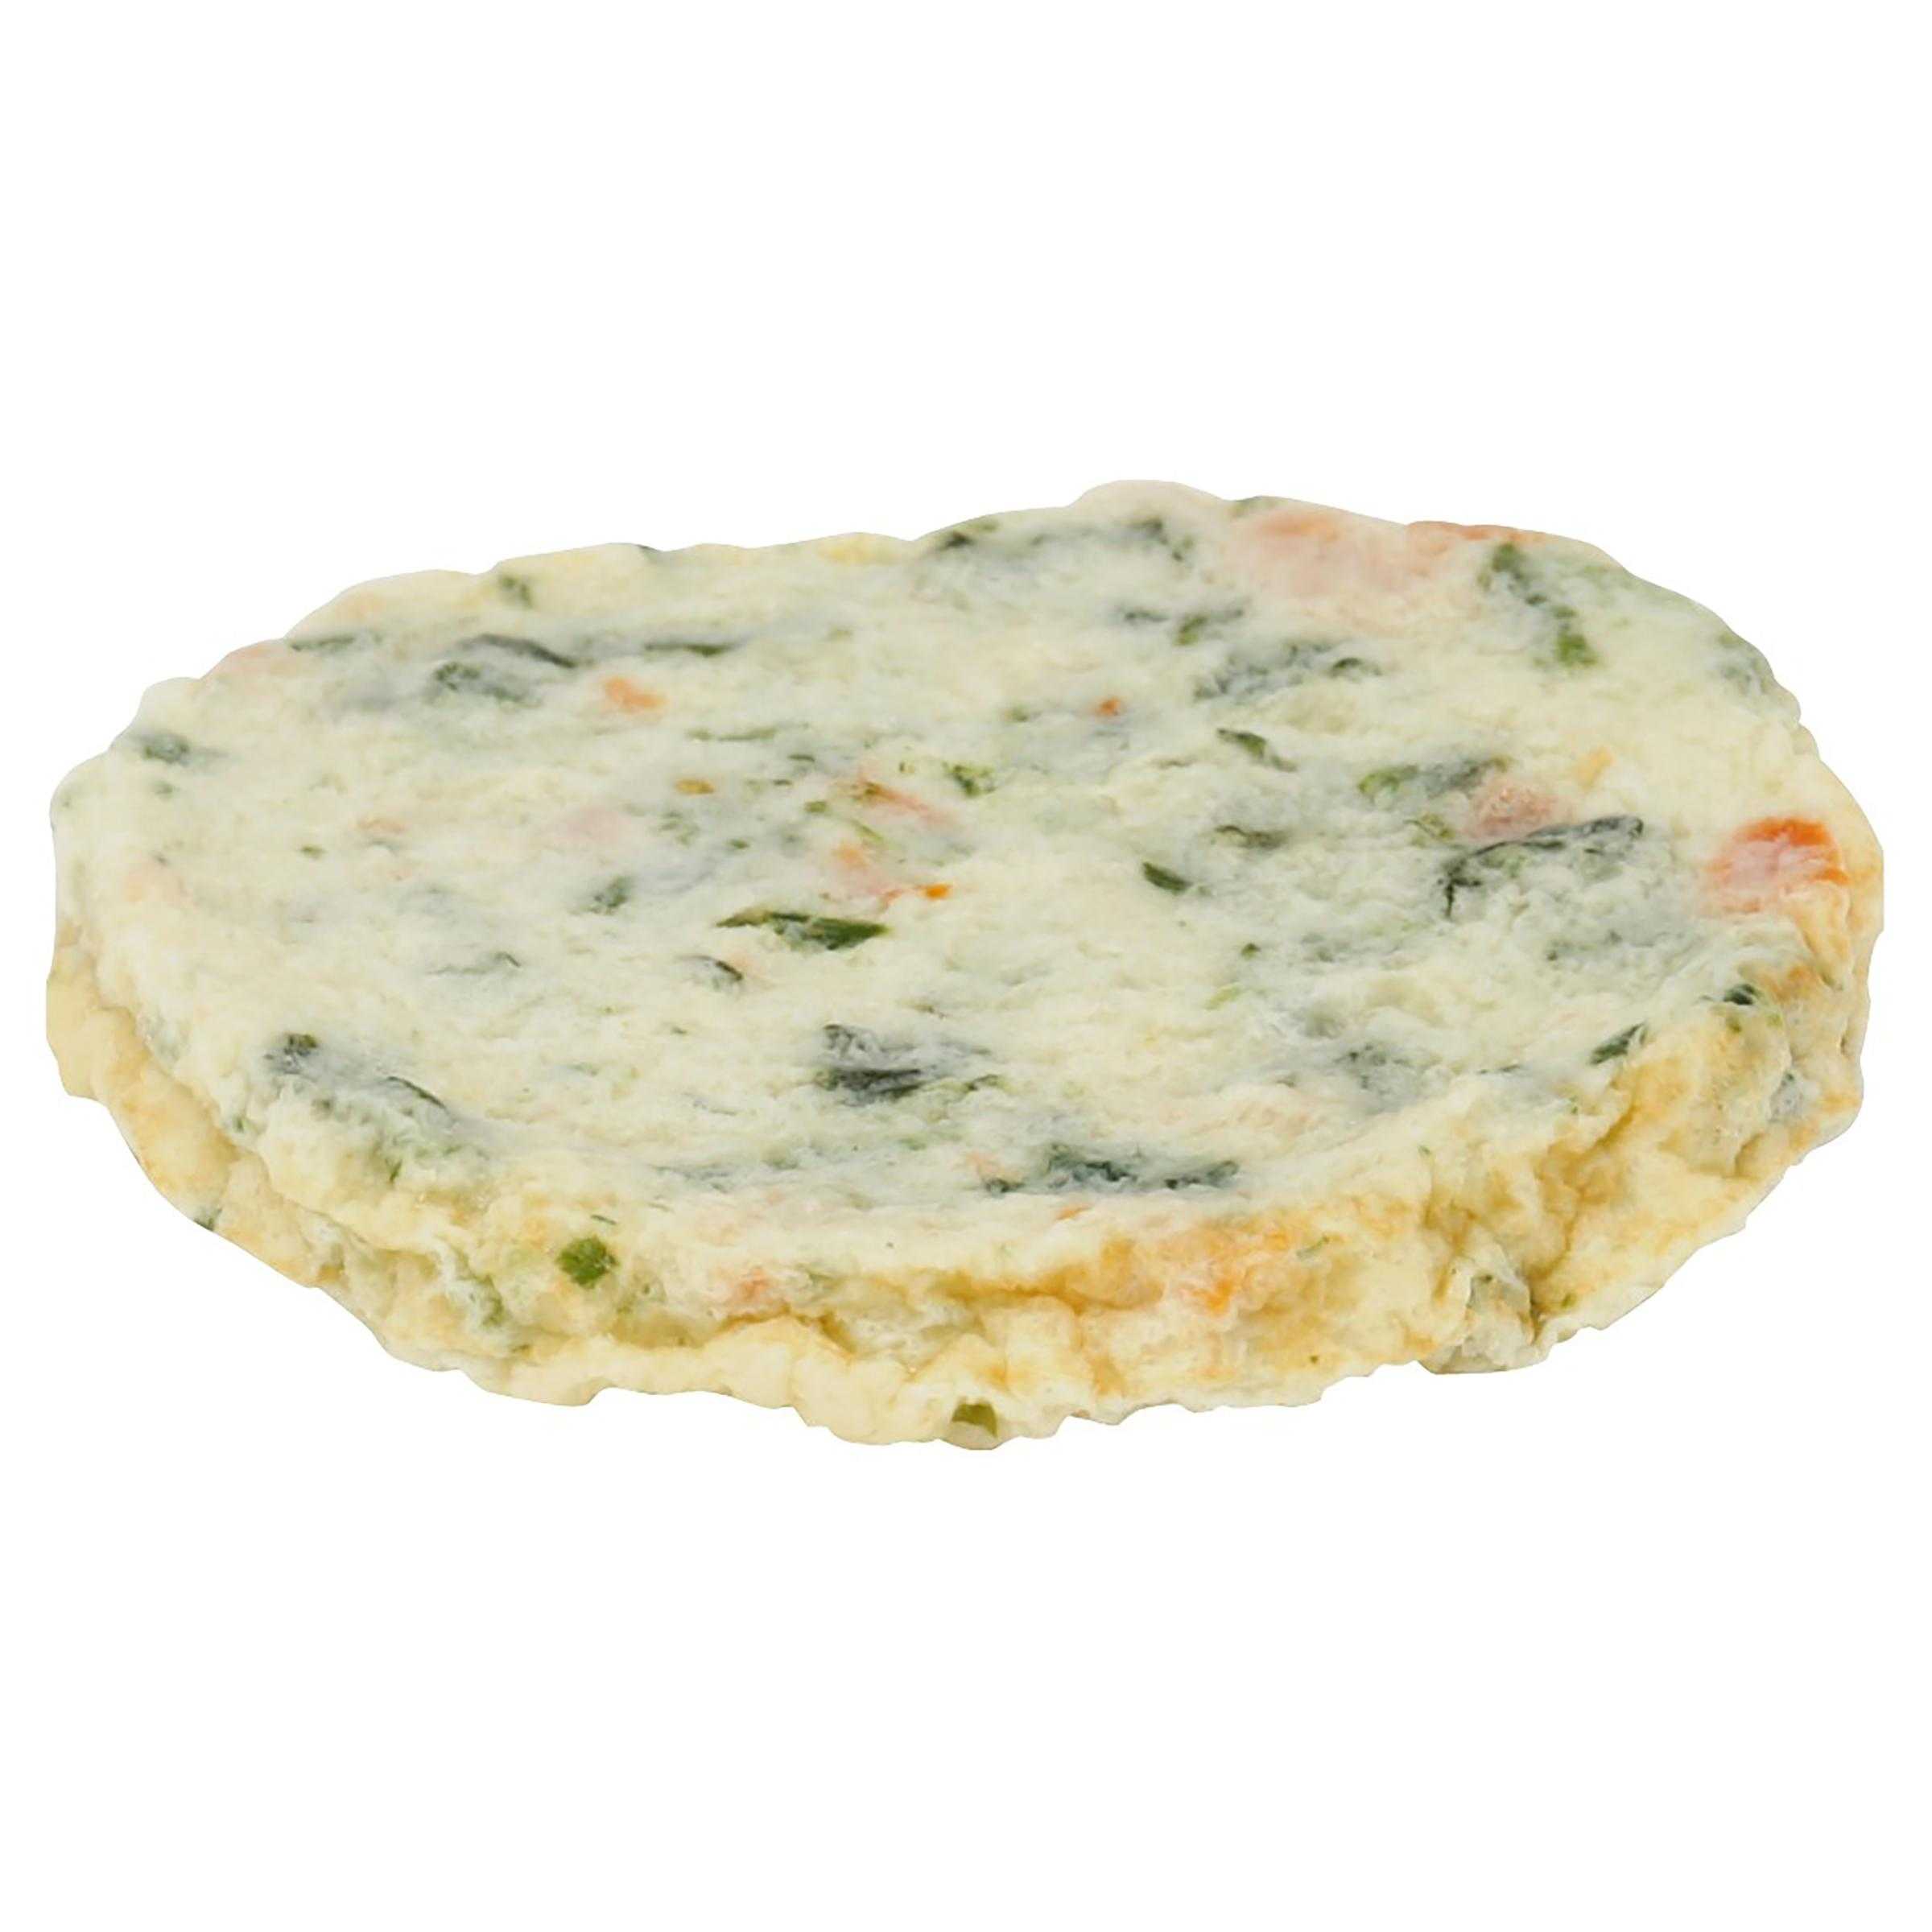 Papetti’s® Fully Cooked 3.5” Round Garden Vegetable Egg White Patties with Cheese, Tomatoes, Spinach and Basil Flavor, 160/1.5 oz